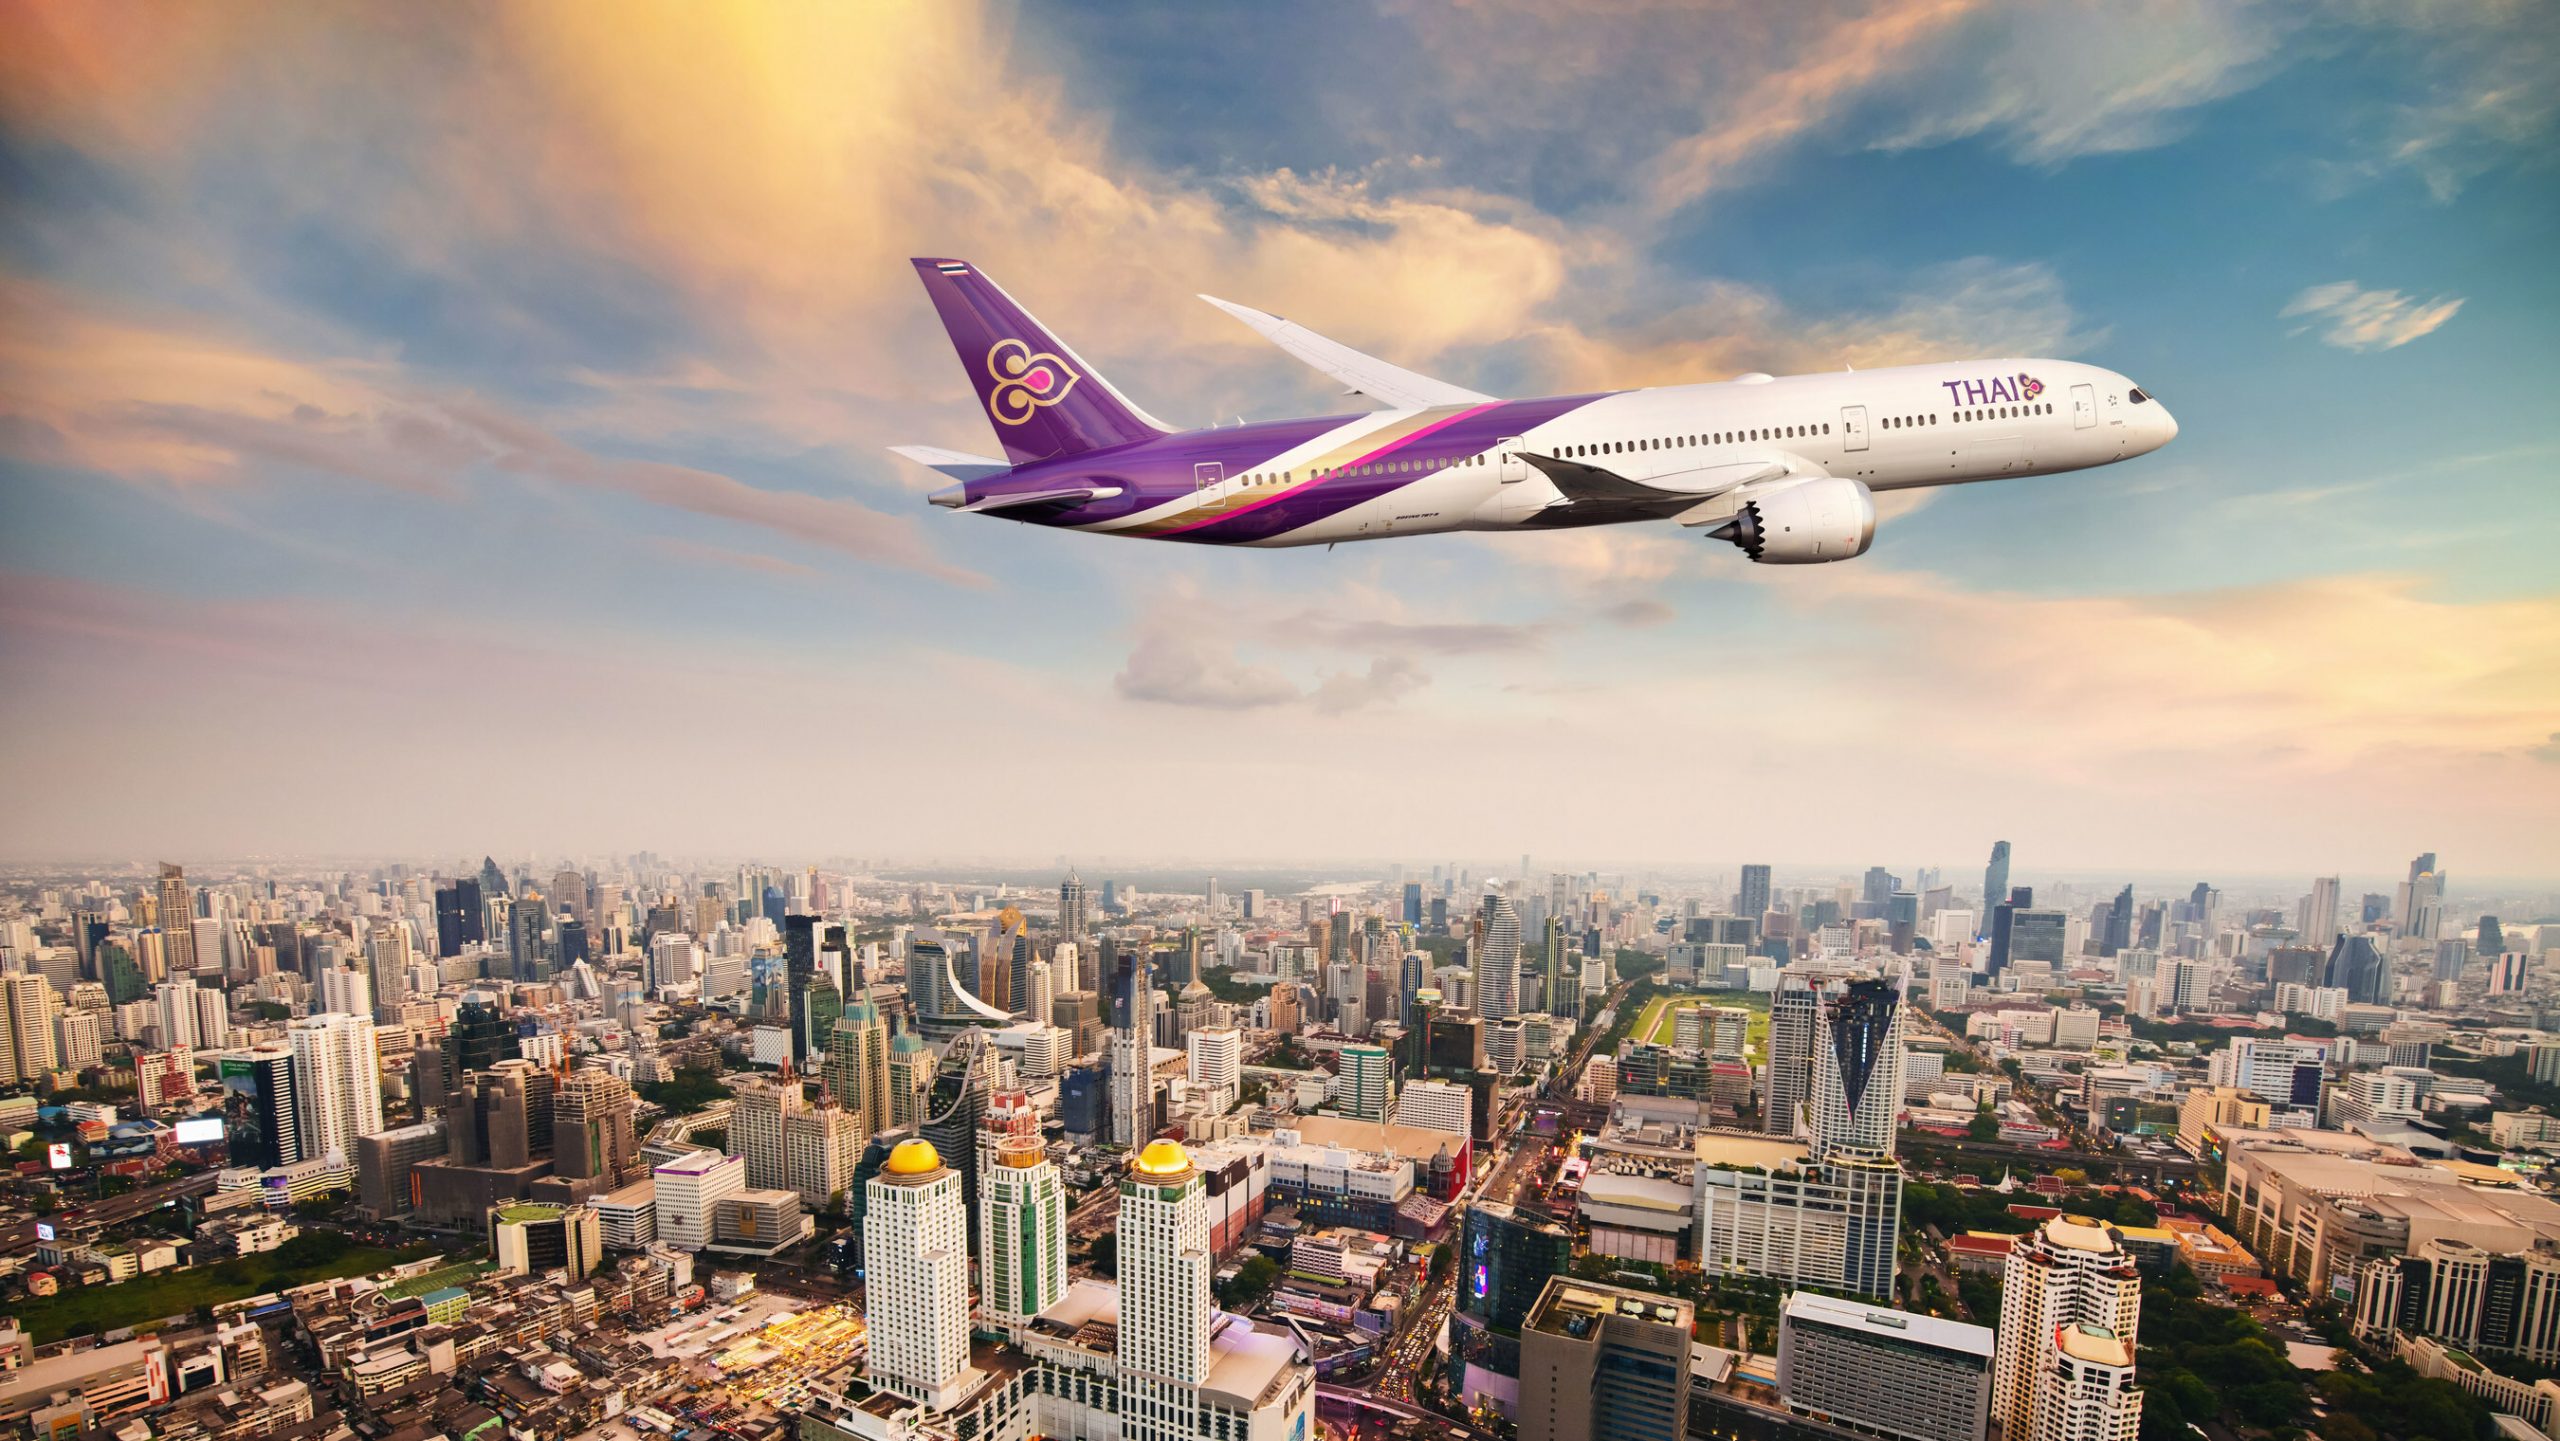 Boeing, Thai Airways announce significant expansion with order for 45 787 Dreamliners